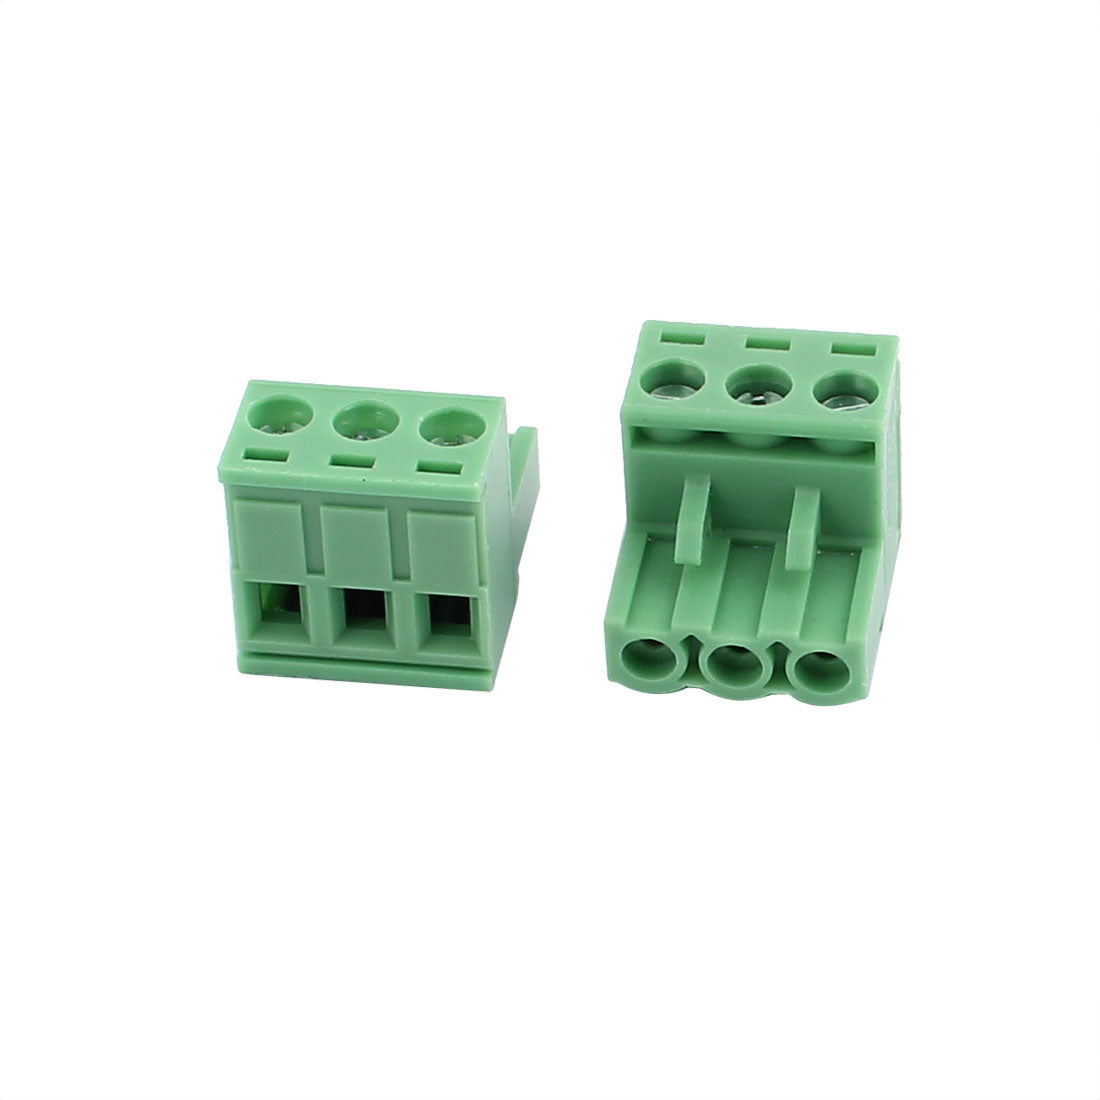 uxcell Uxcell 20Pcs 300V KF2EDGK 5.08mm Pitch 3-Pin PCB Screw Terminal Block Connector